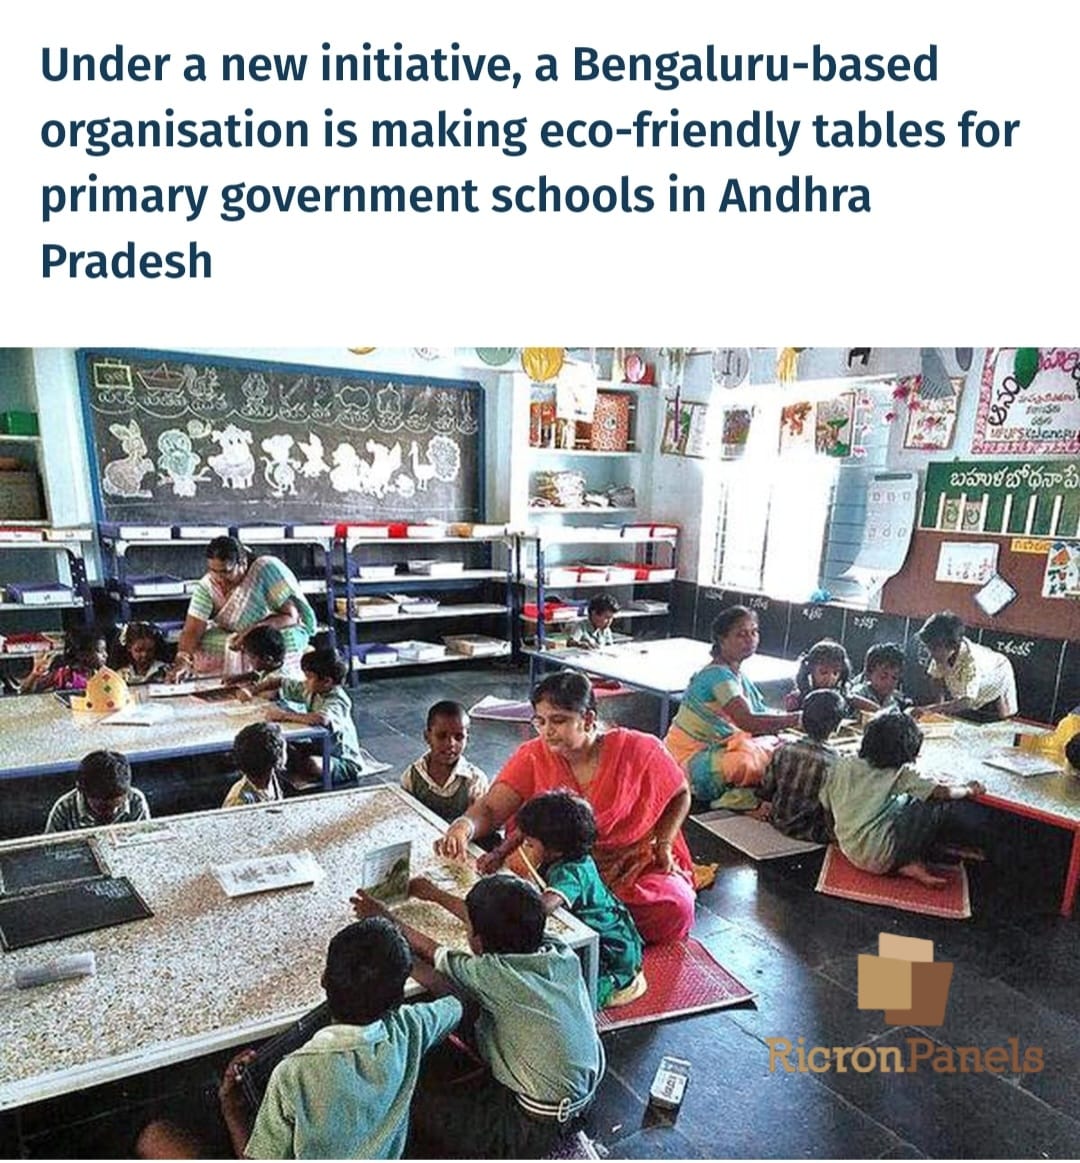 A Bengaluru - Based Organisation is making eco- friendly tables for primary government schools in Andhra Pradesh